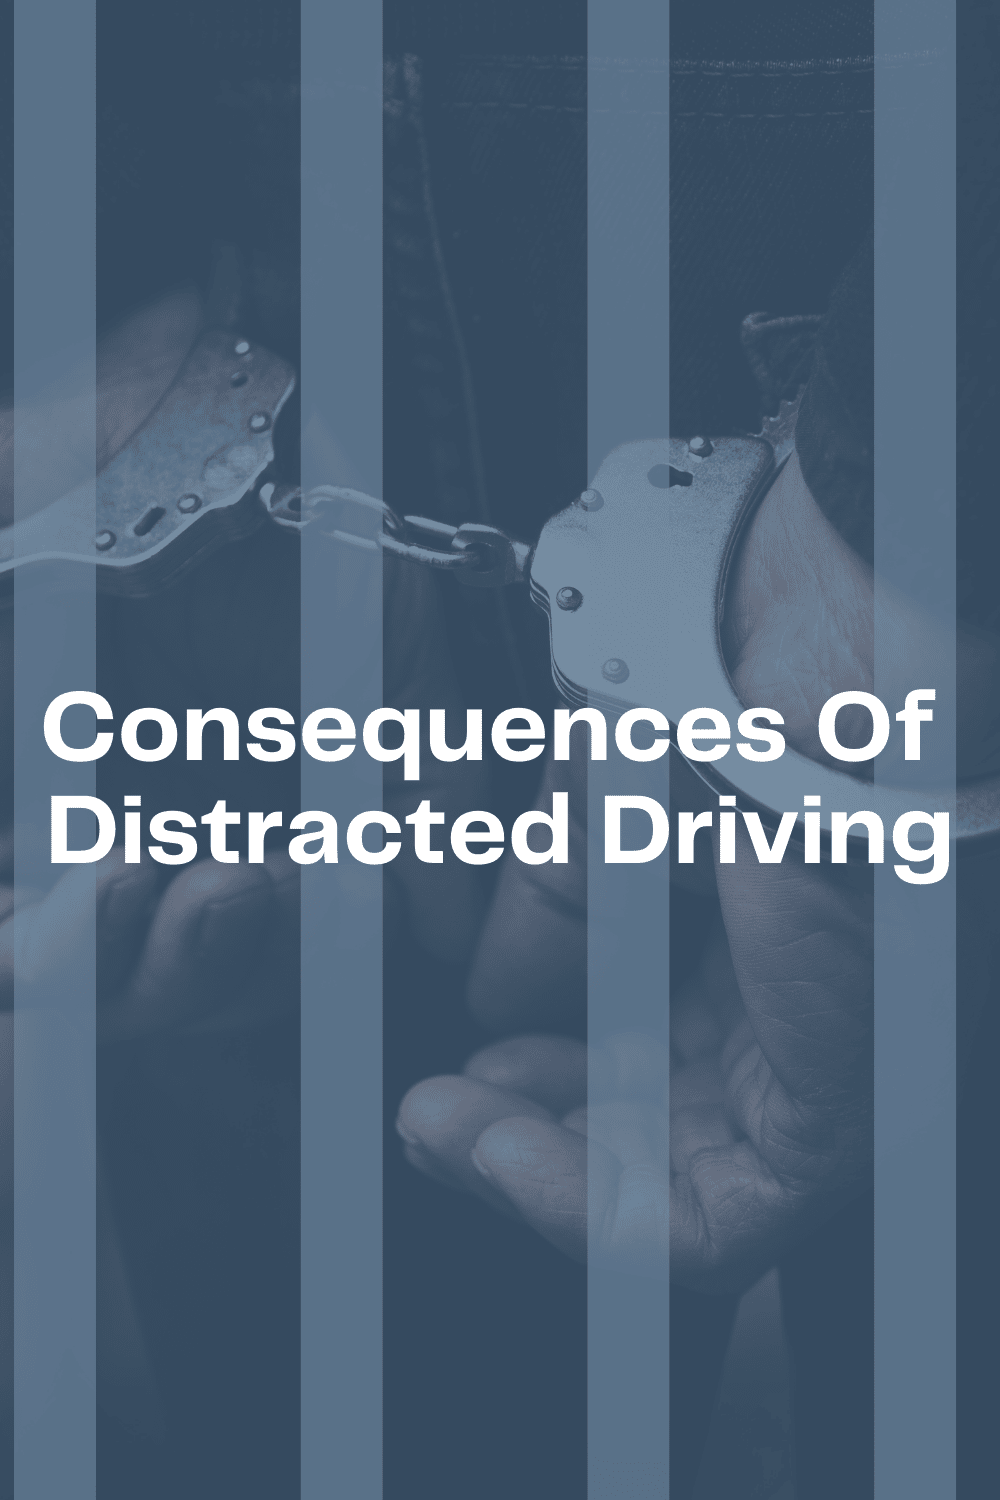 Consequences Of Distracted Driving Explained